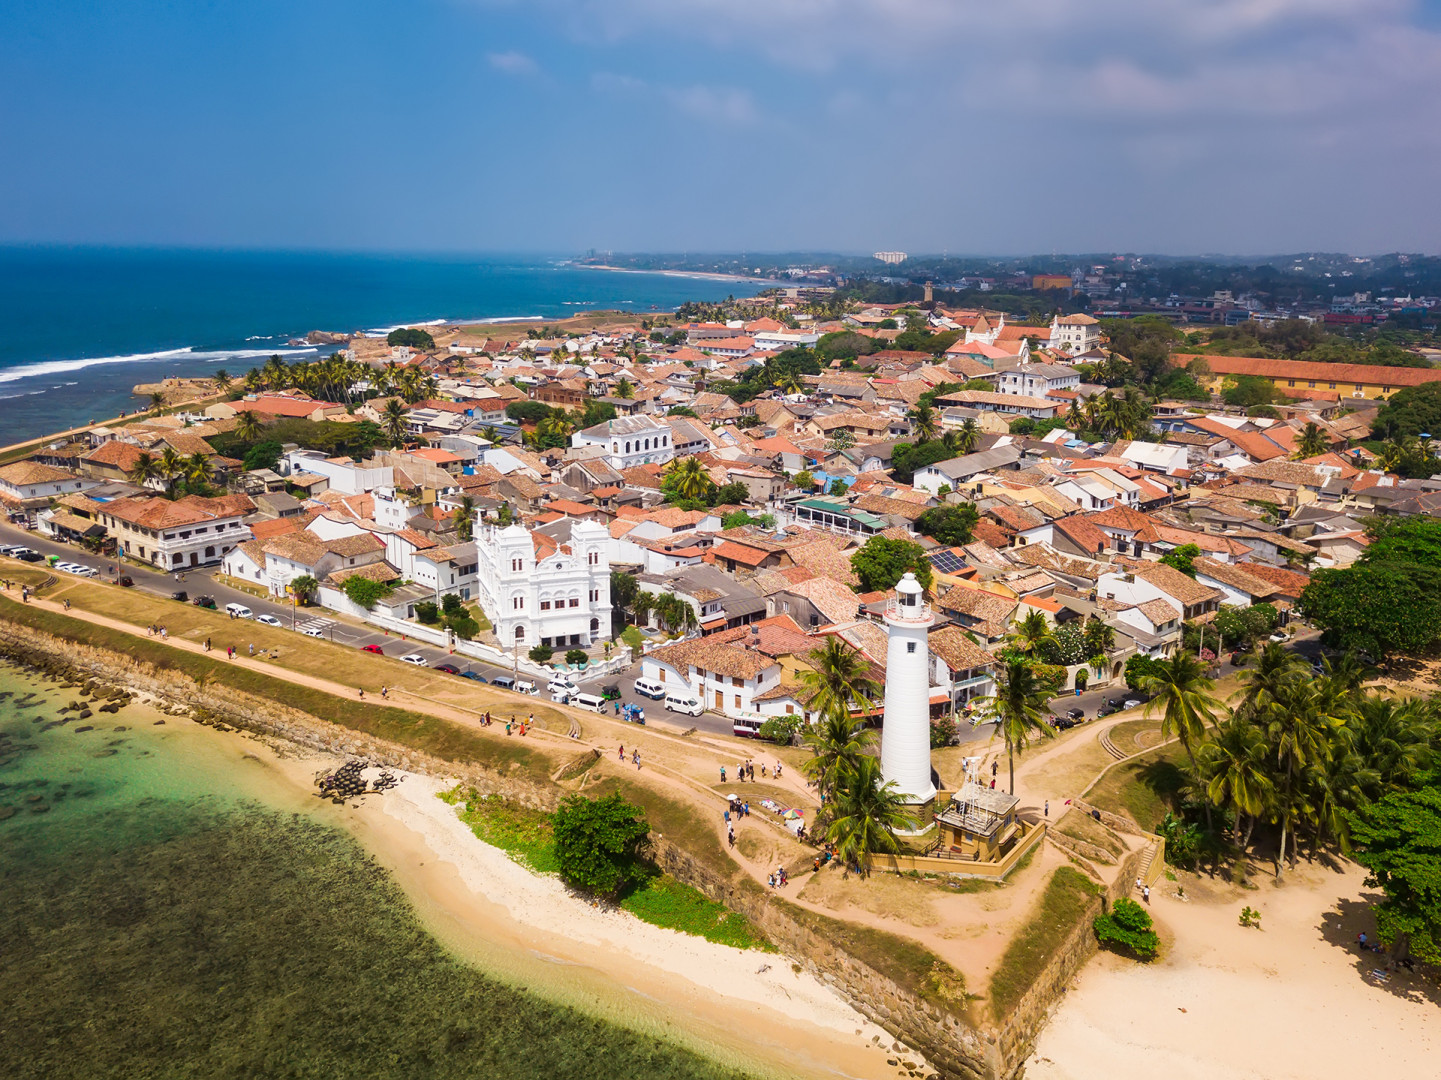 Tourist Attraction in Sri Lanka 2. A World Heritage Site Infused with Portuguese Flair: Old Town of Galle and its Fortifications